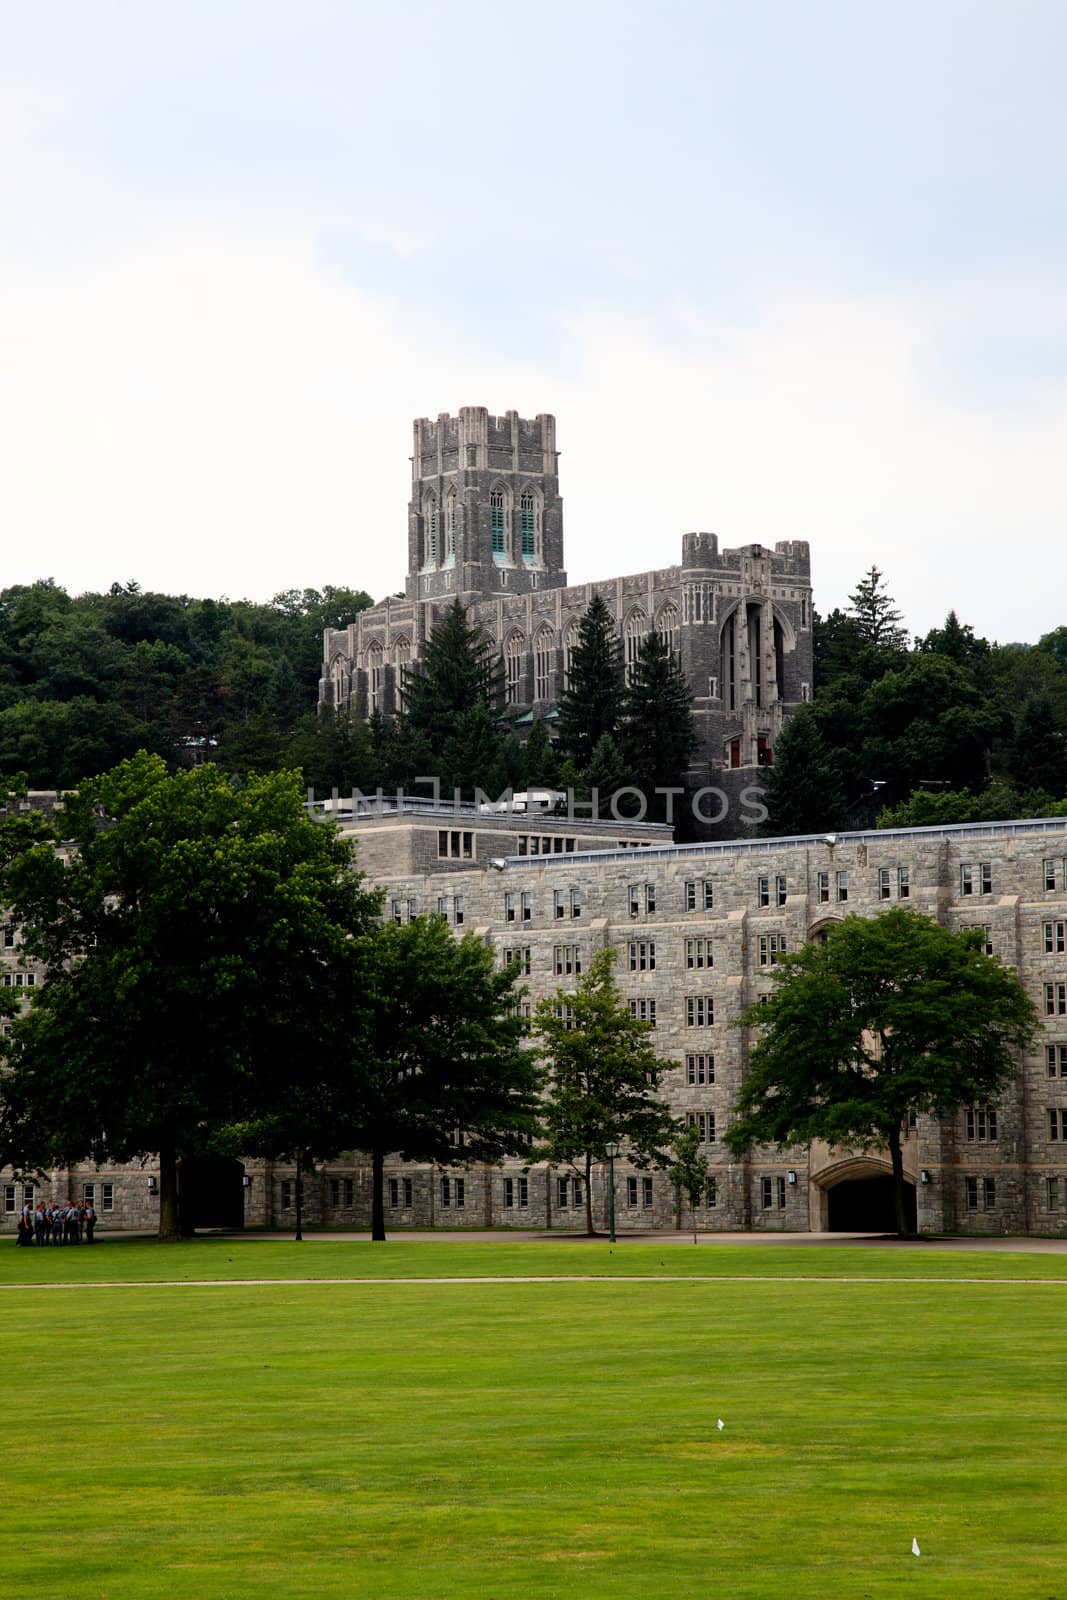 The scenery of the Westpoint Academy by gary718